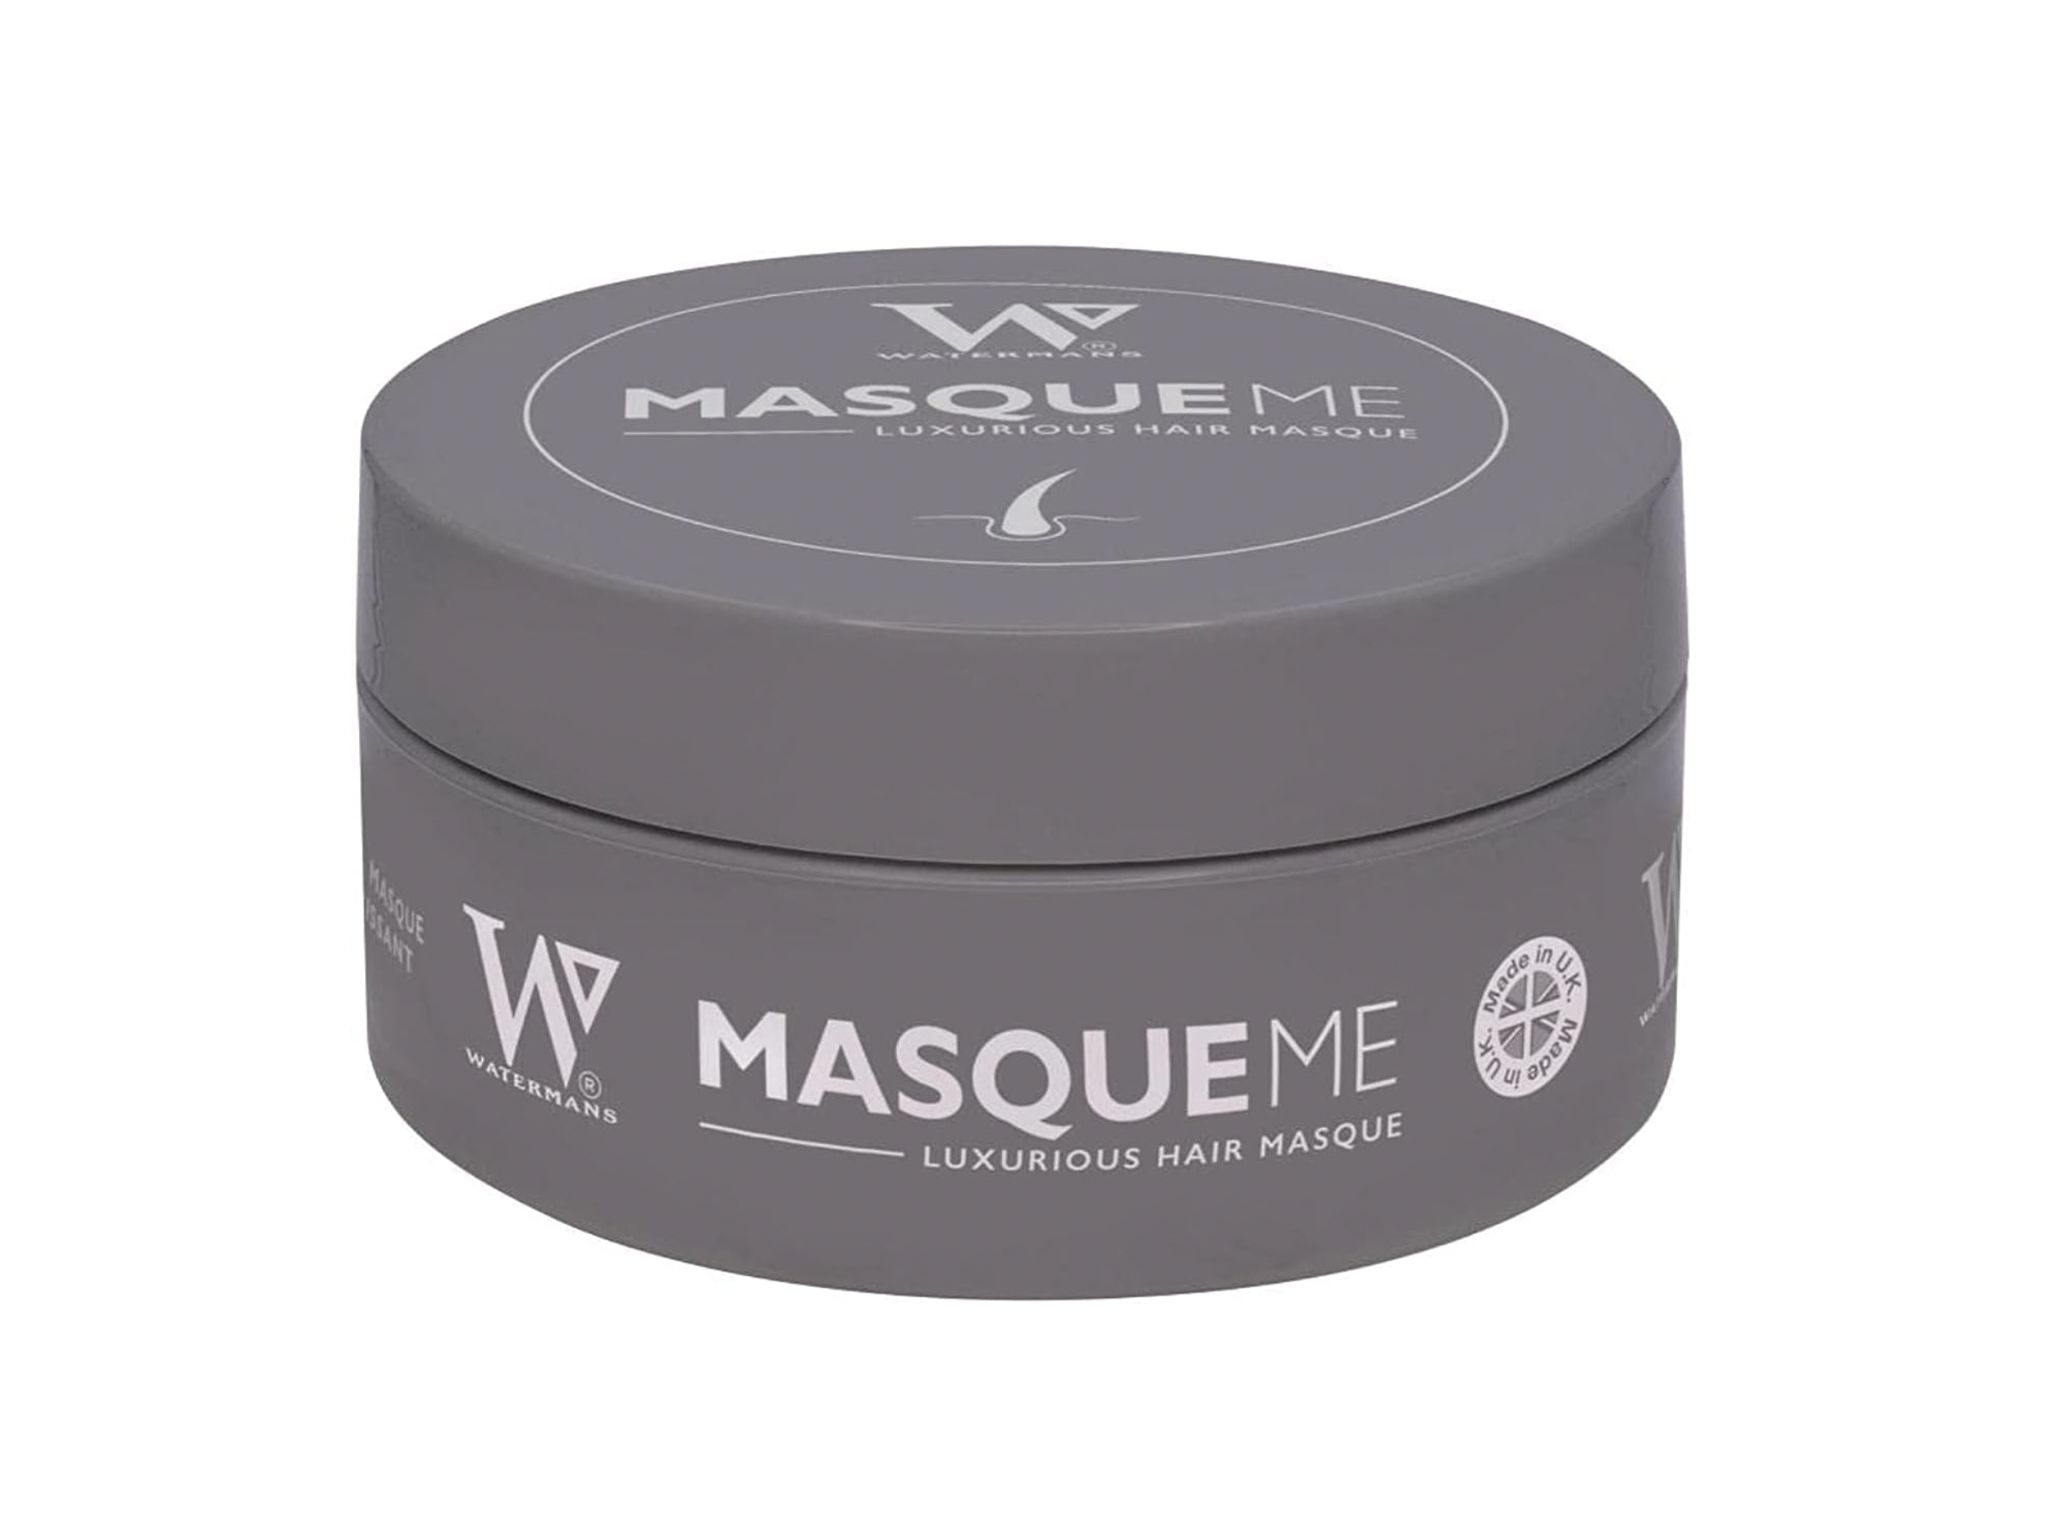 Watermans masque me hydrating hair mask